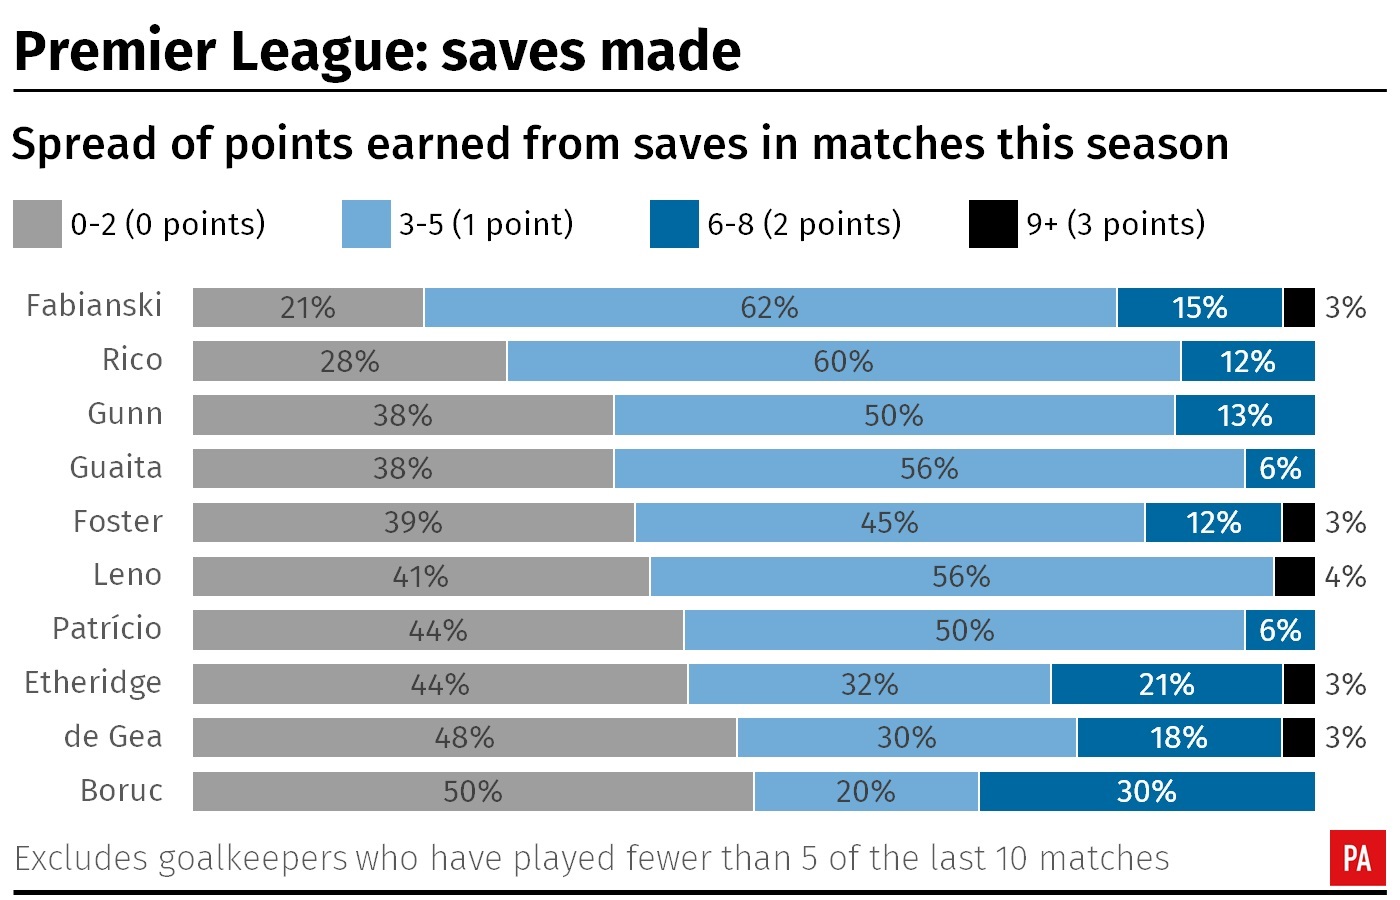 A graphic showing the spread of Fantasy Premier League points earned from saves by goalkeepers in matches this season